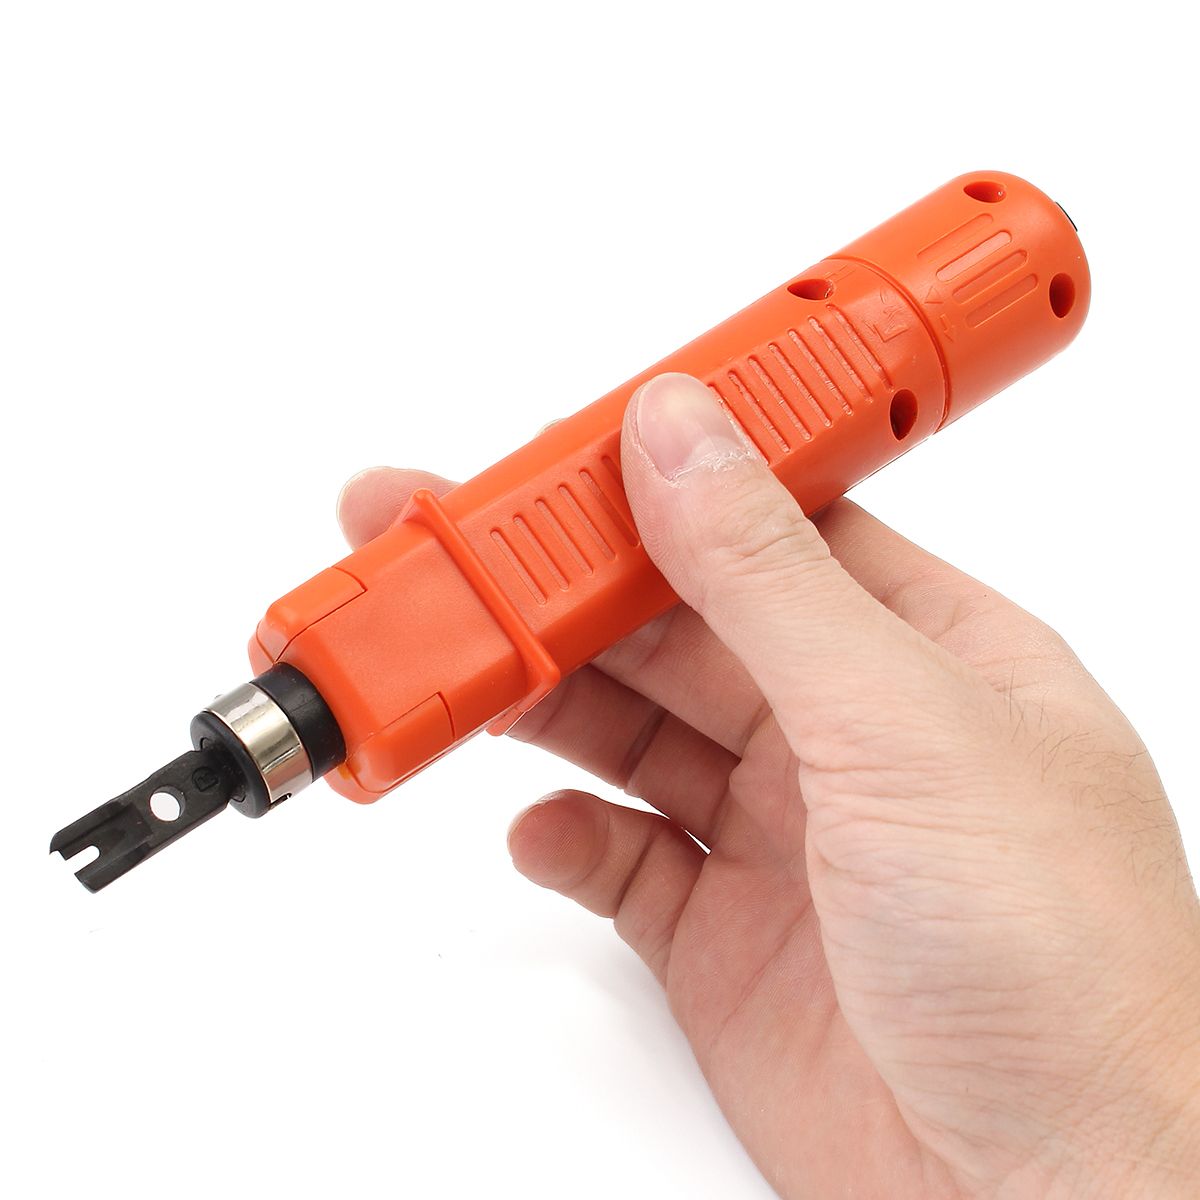 11-in-1-RJ45-RJ11-Cable-Manual-Hand-Tool-Crimper-Network-Tool-Kit-Punch-Down-Impact-Tools-1095693